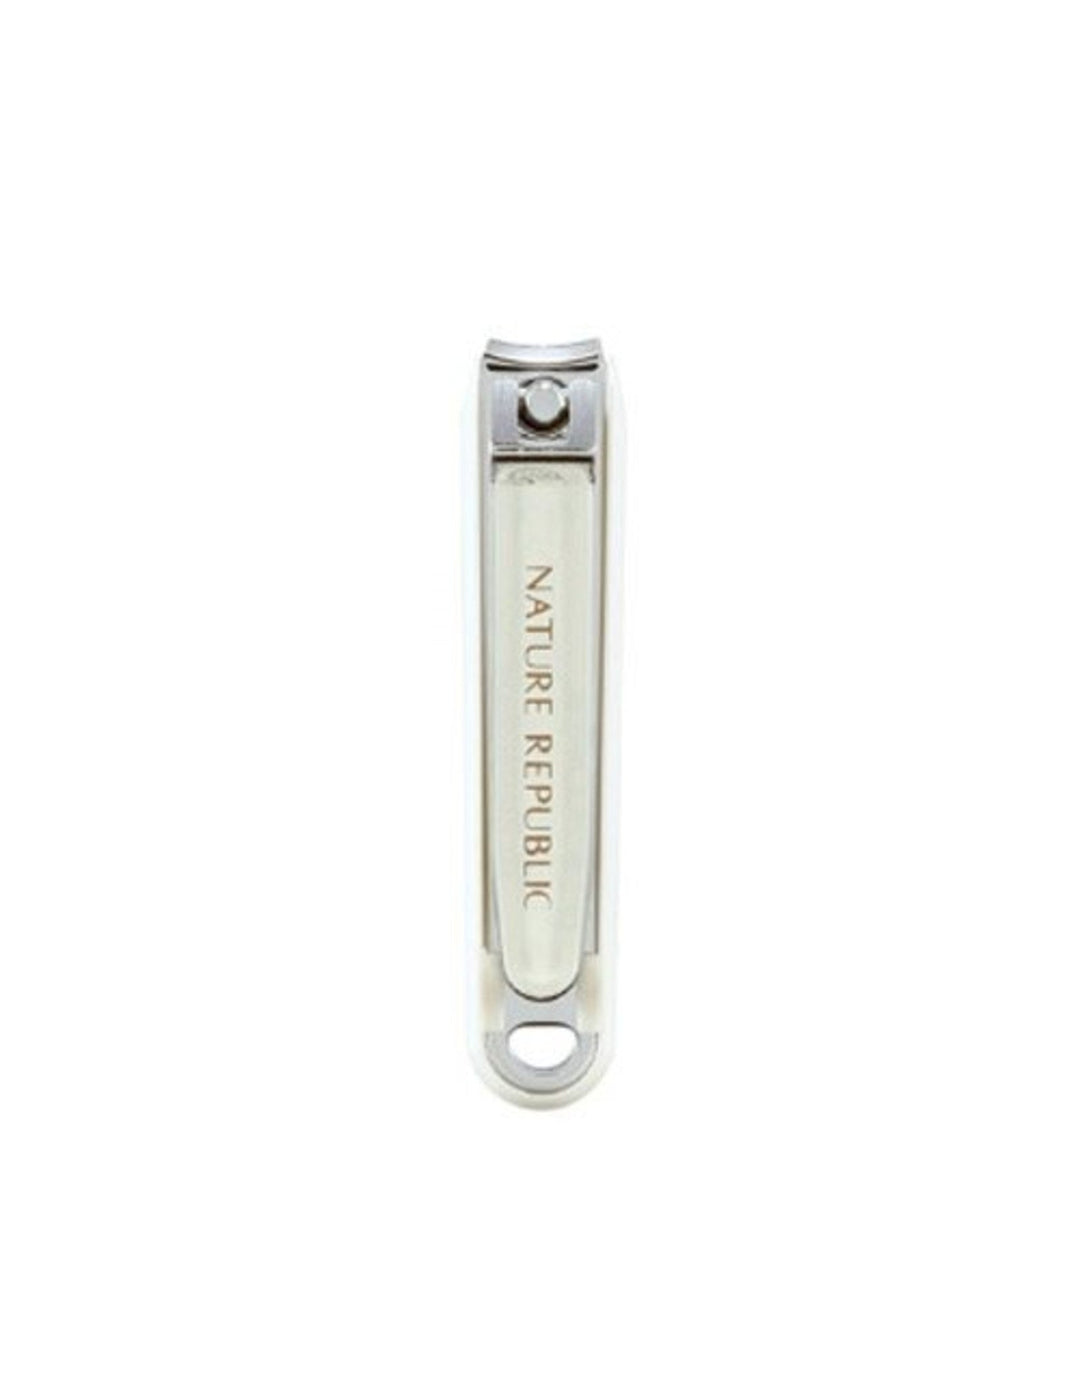 Beauty Tool Nail Clippers (Small) - Nature Republic